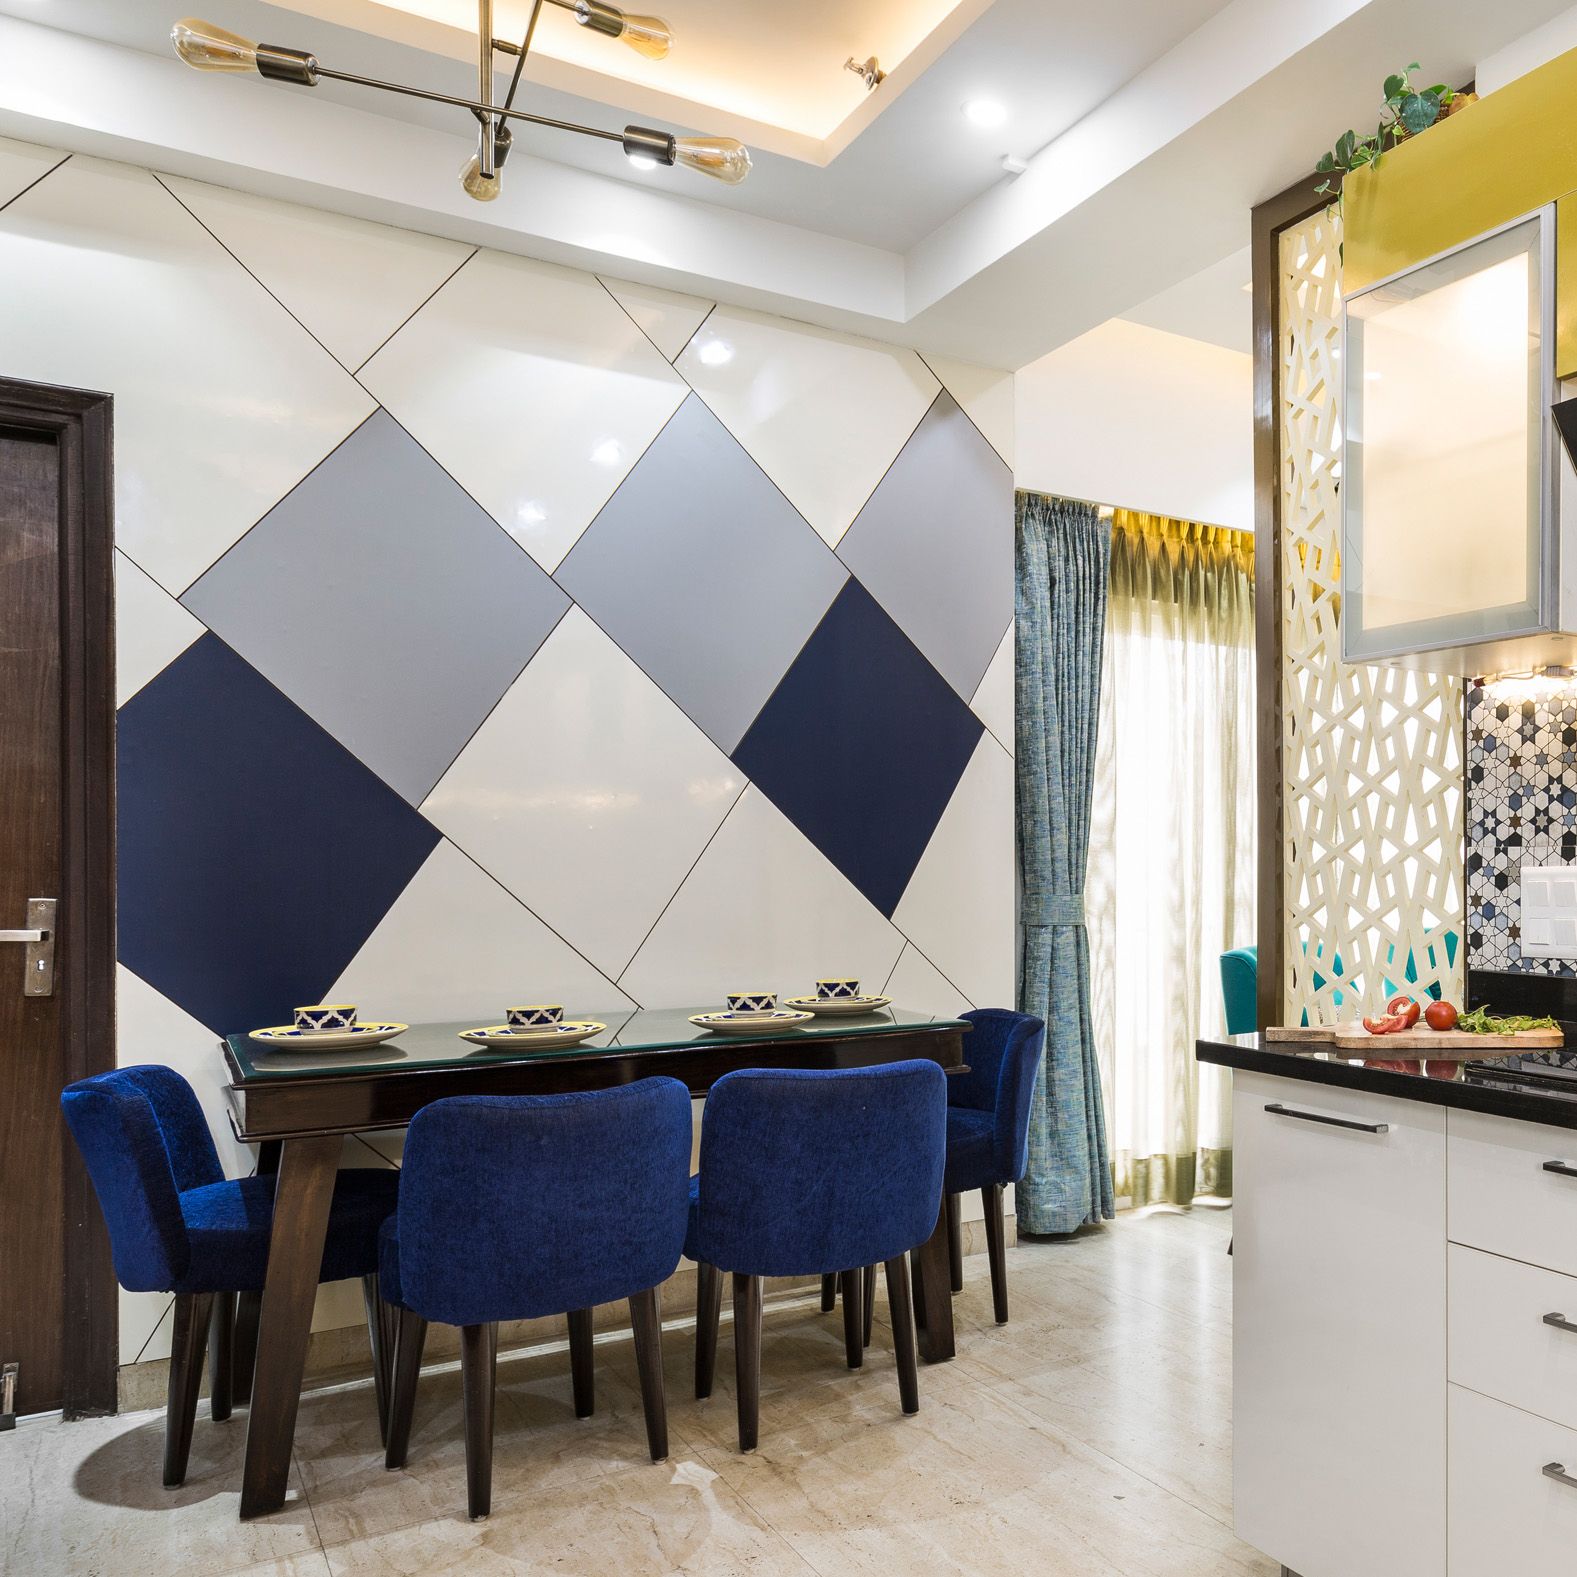 Modern Geometric Wall Paint Design With Blue And Grey Shades